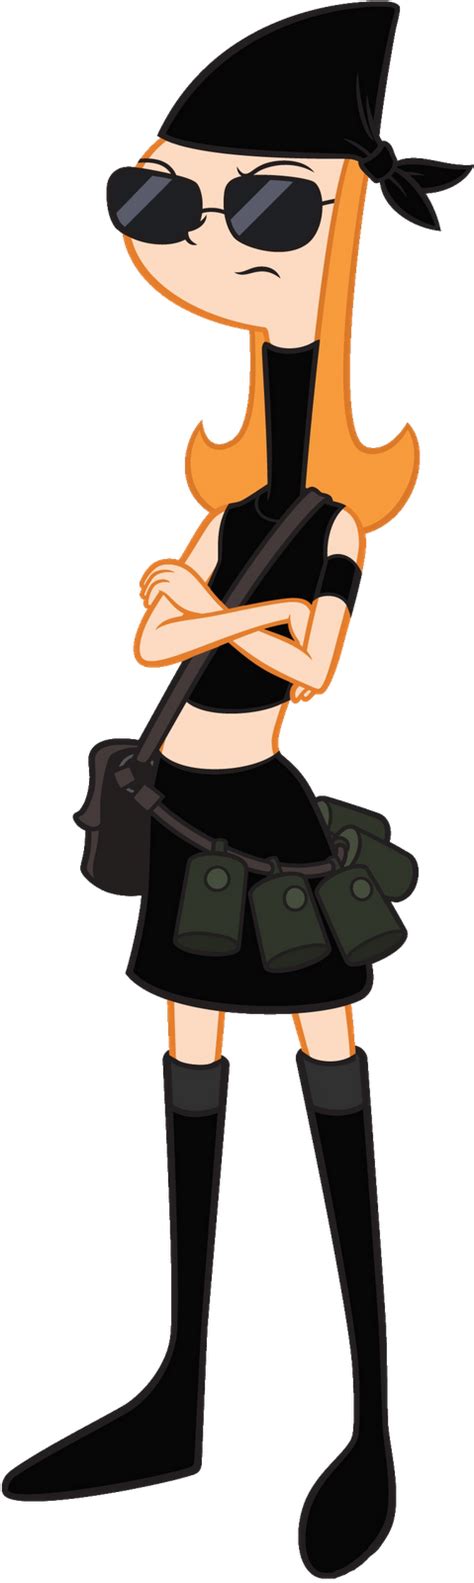 Image 2nd Dimension Candace Flynnpng Phineas E Ferb Wiki Fandom